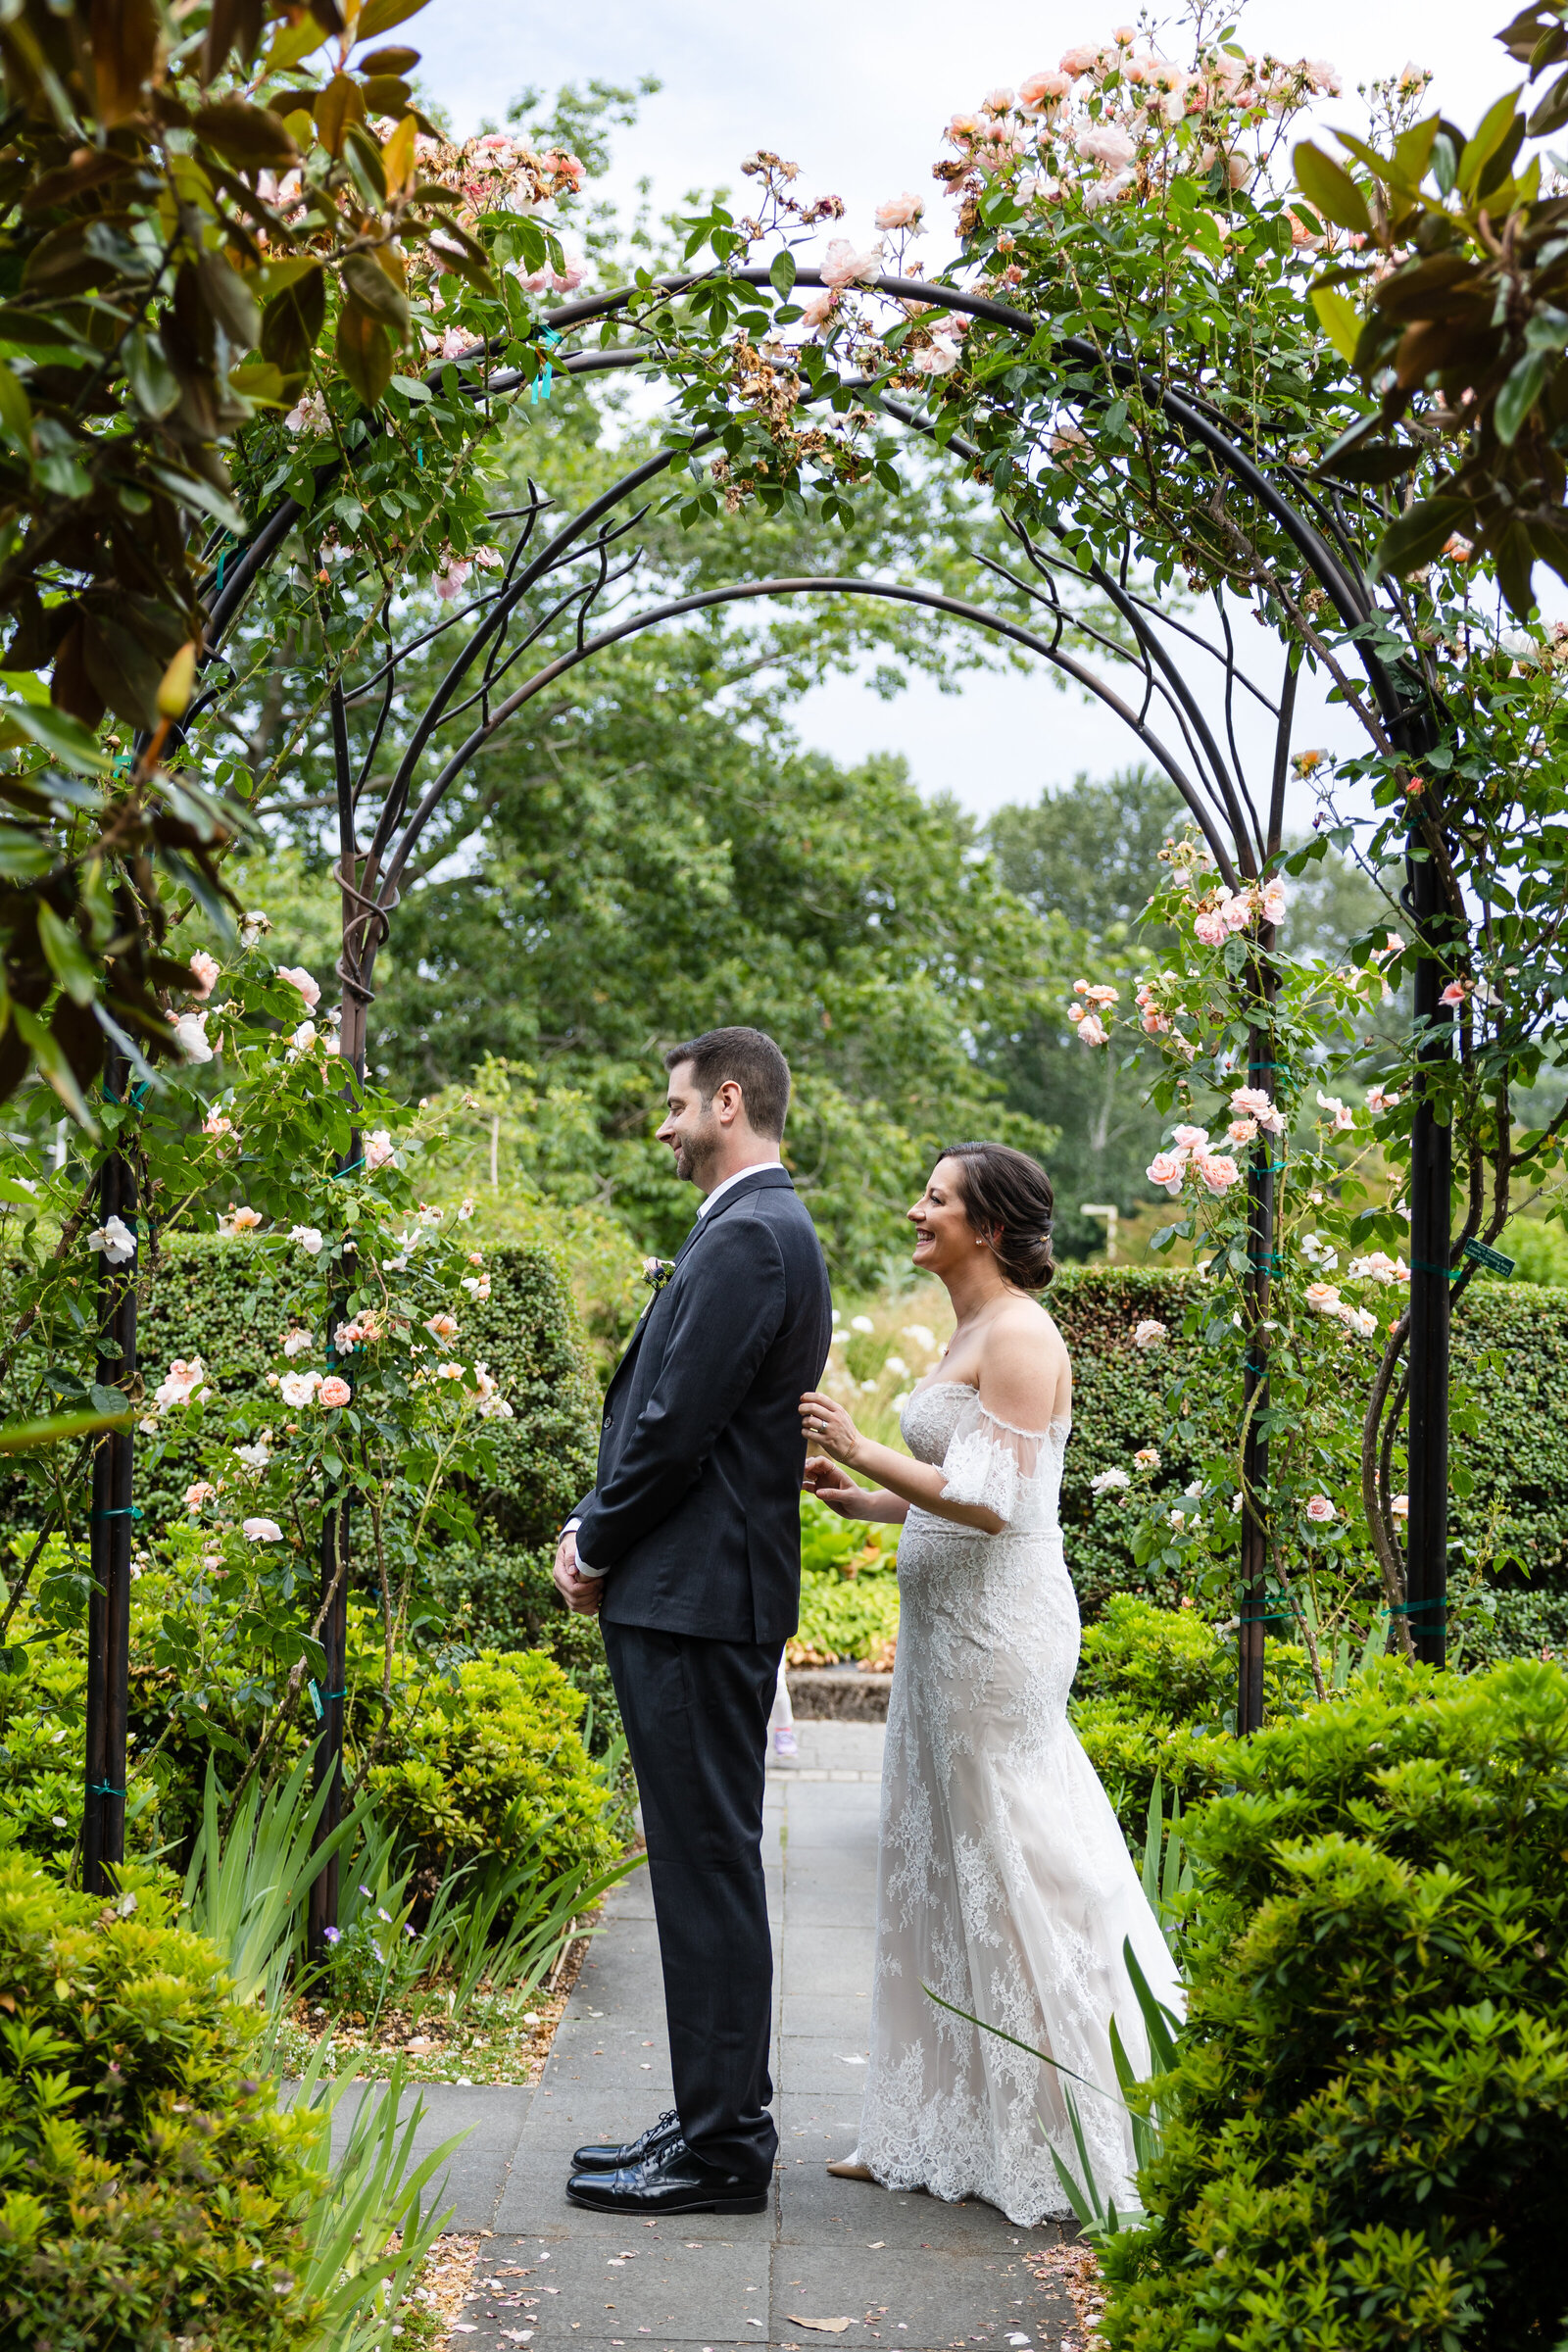 First look at Seattle Wedding Venue, UW Center for Urban Horticulture